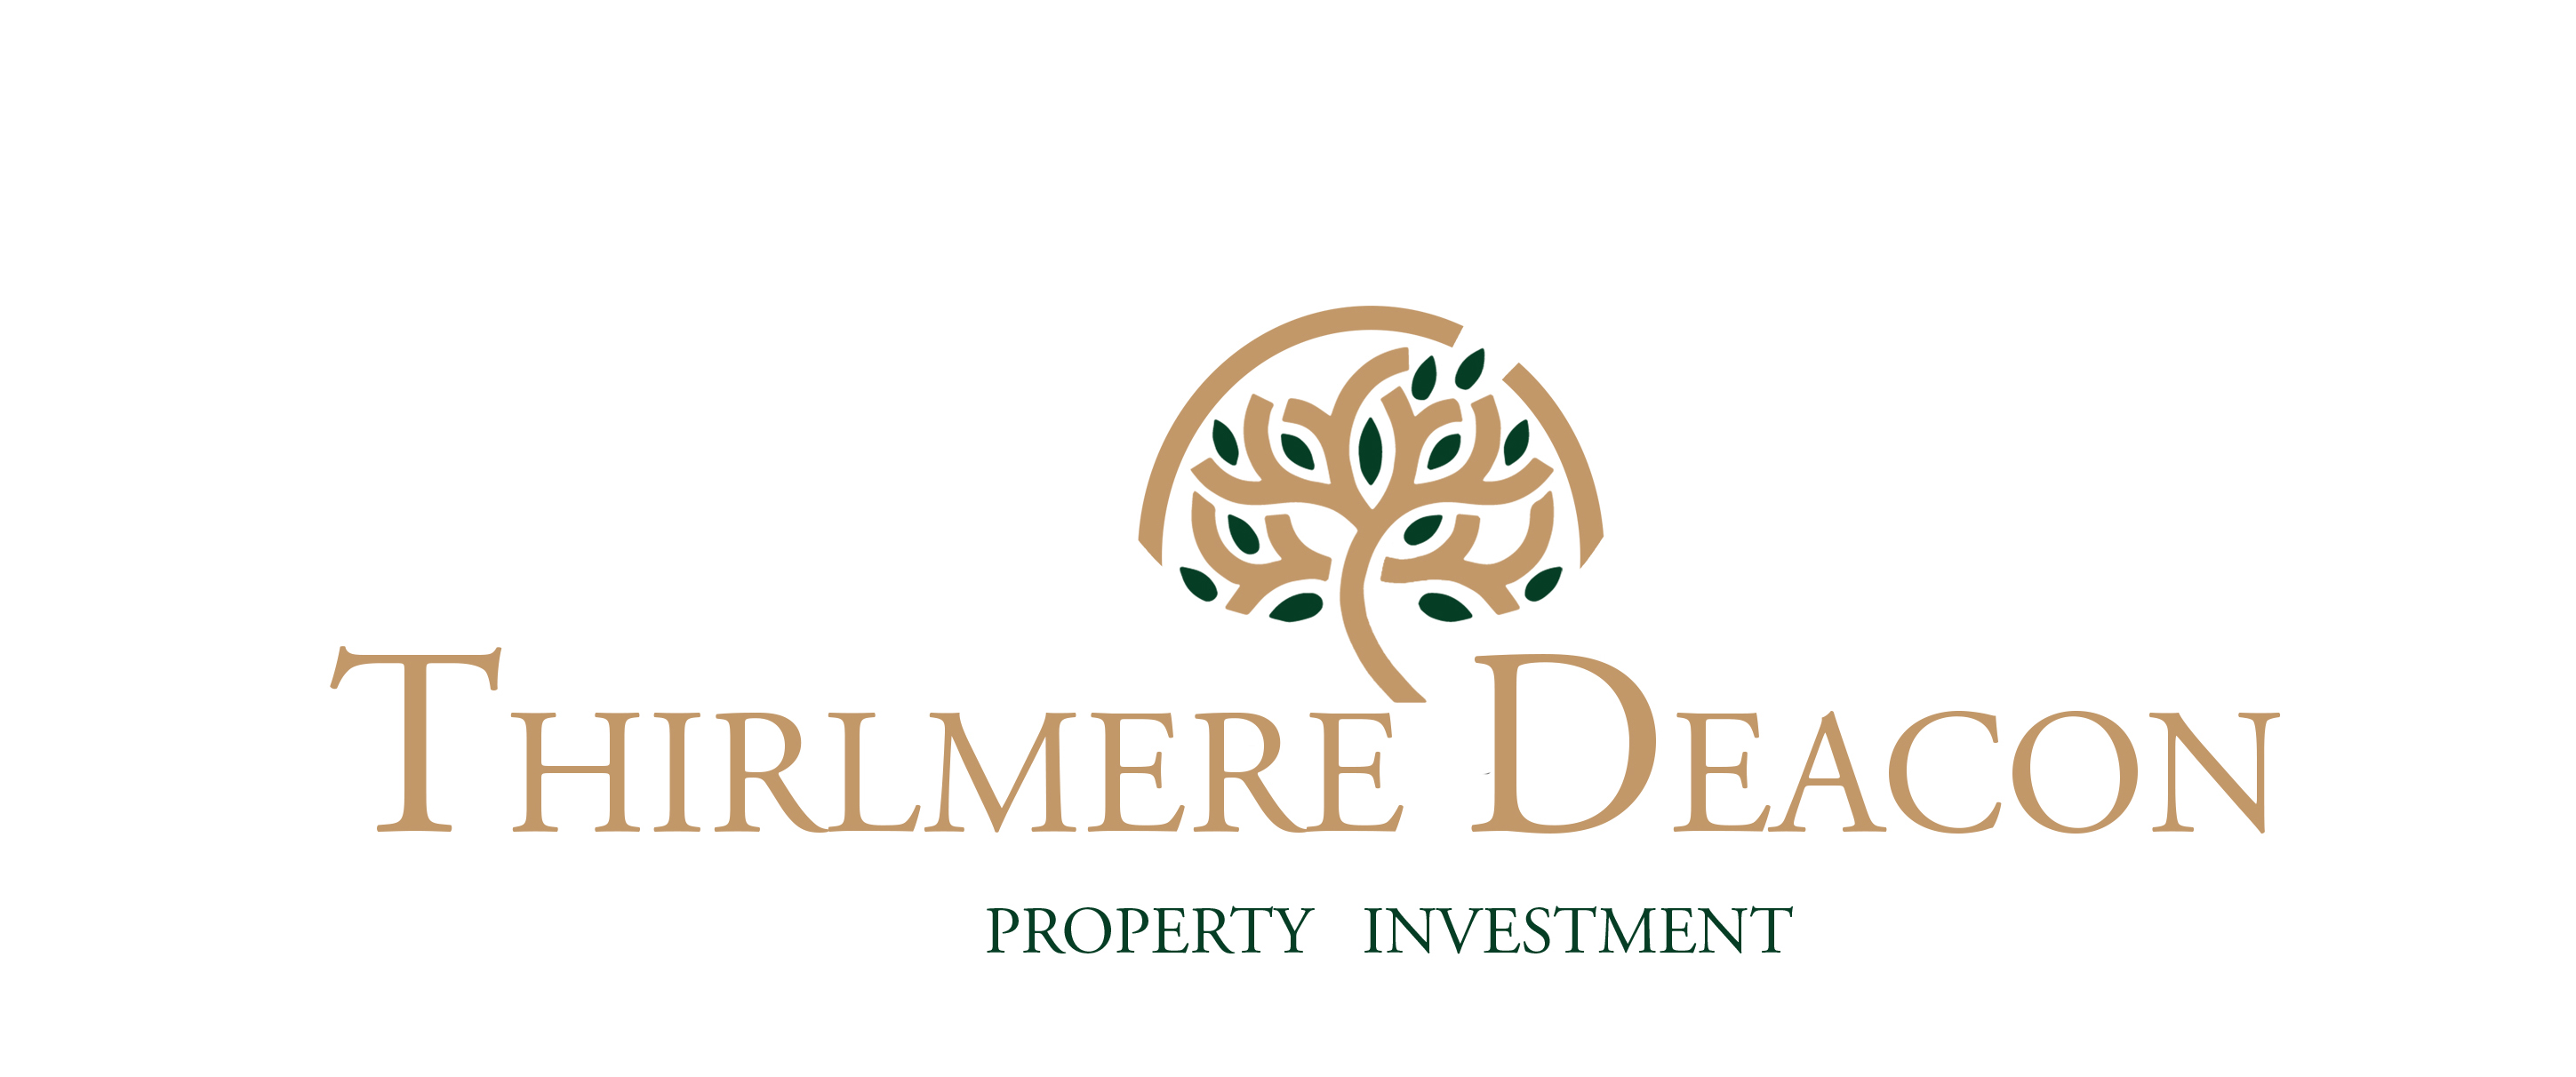 Thirlmere Deacon Property Investment , Monday, May 27, 2019, Press release picture